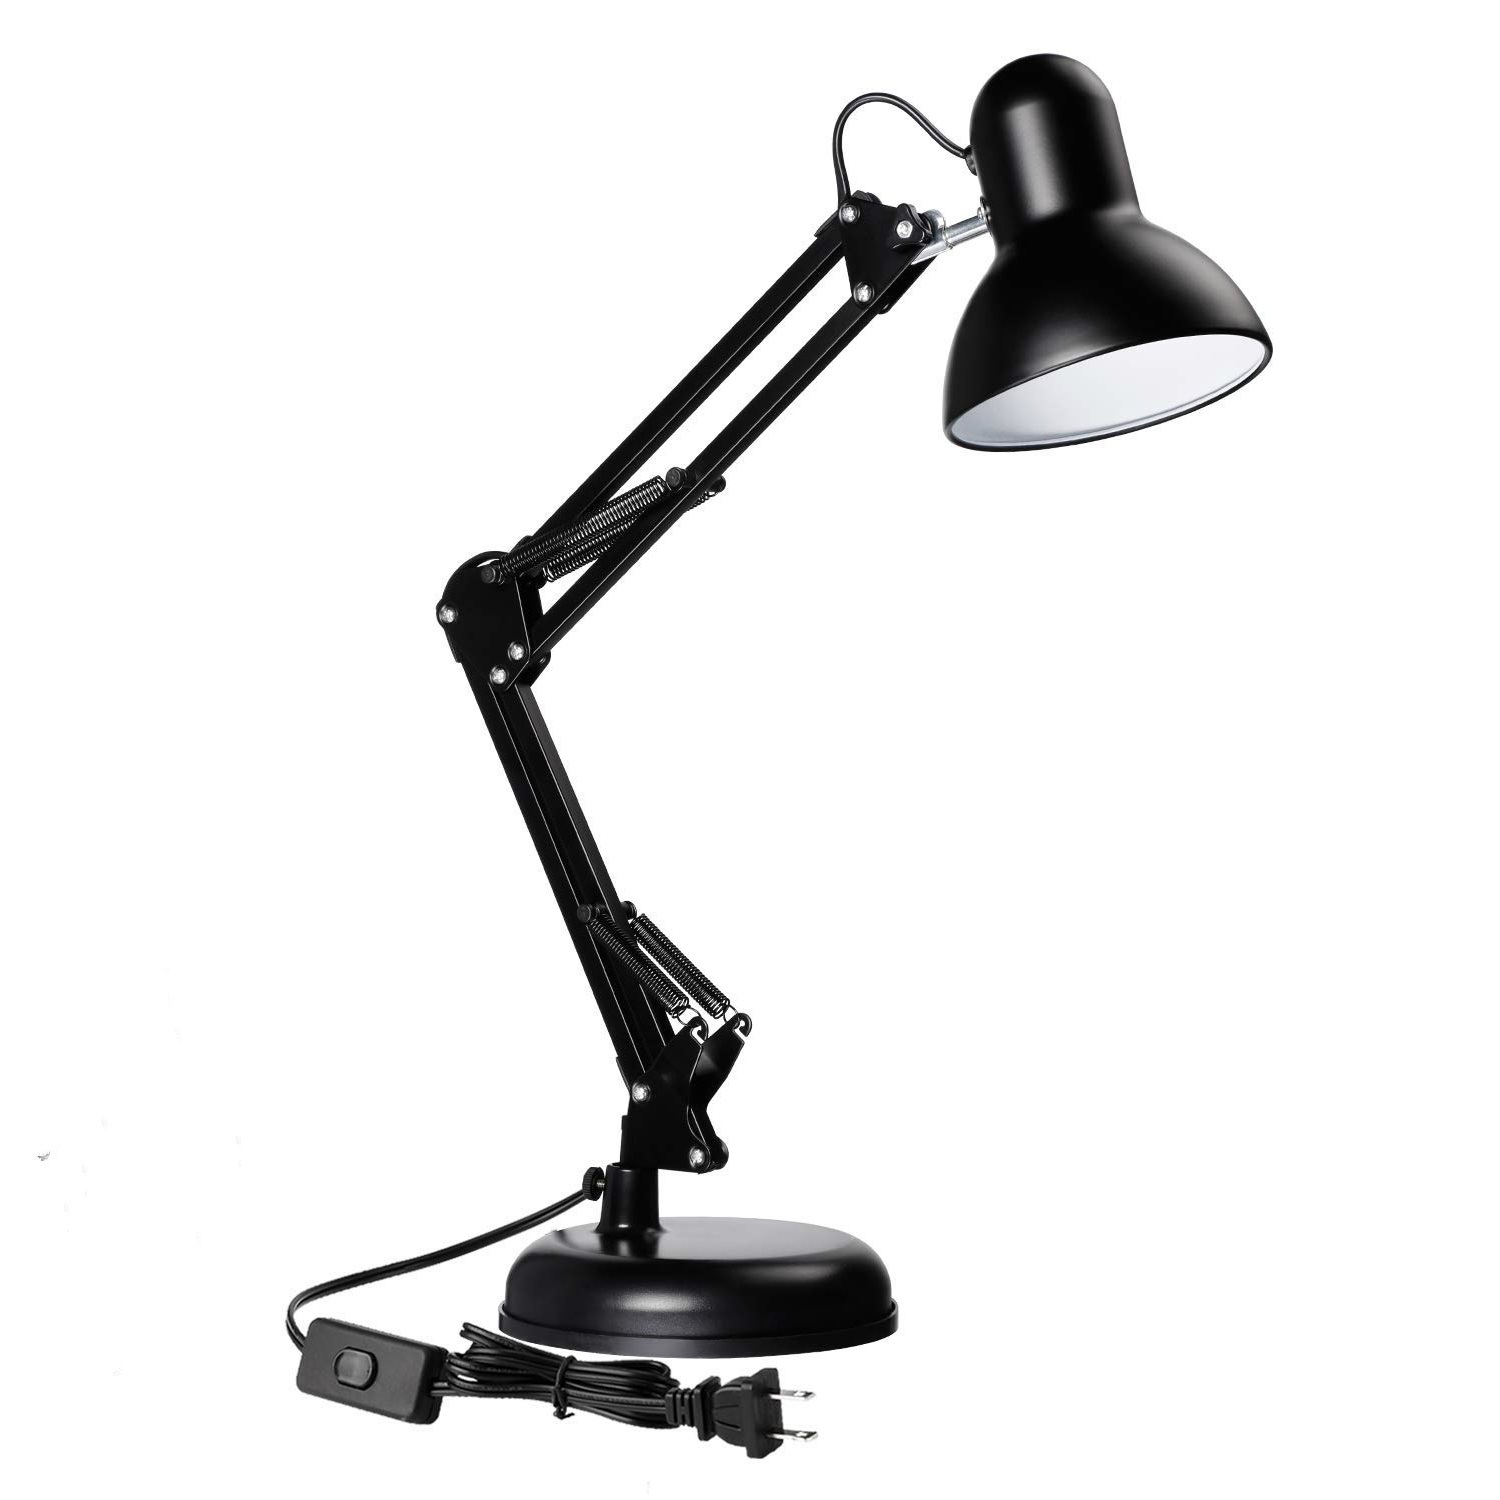 Metal Swing Arm Desk Lamp Classic, Table Lamp With Adjustable Arm